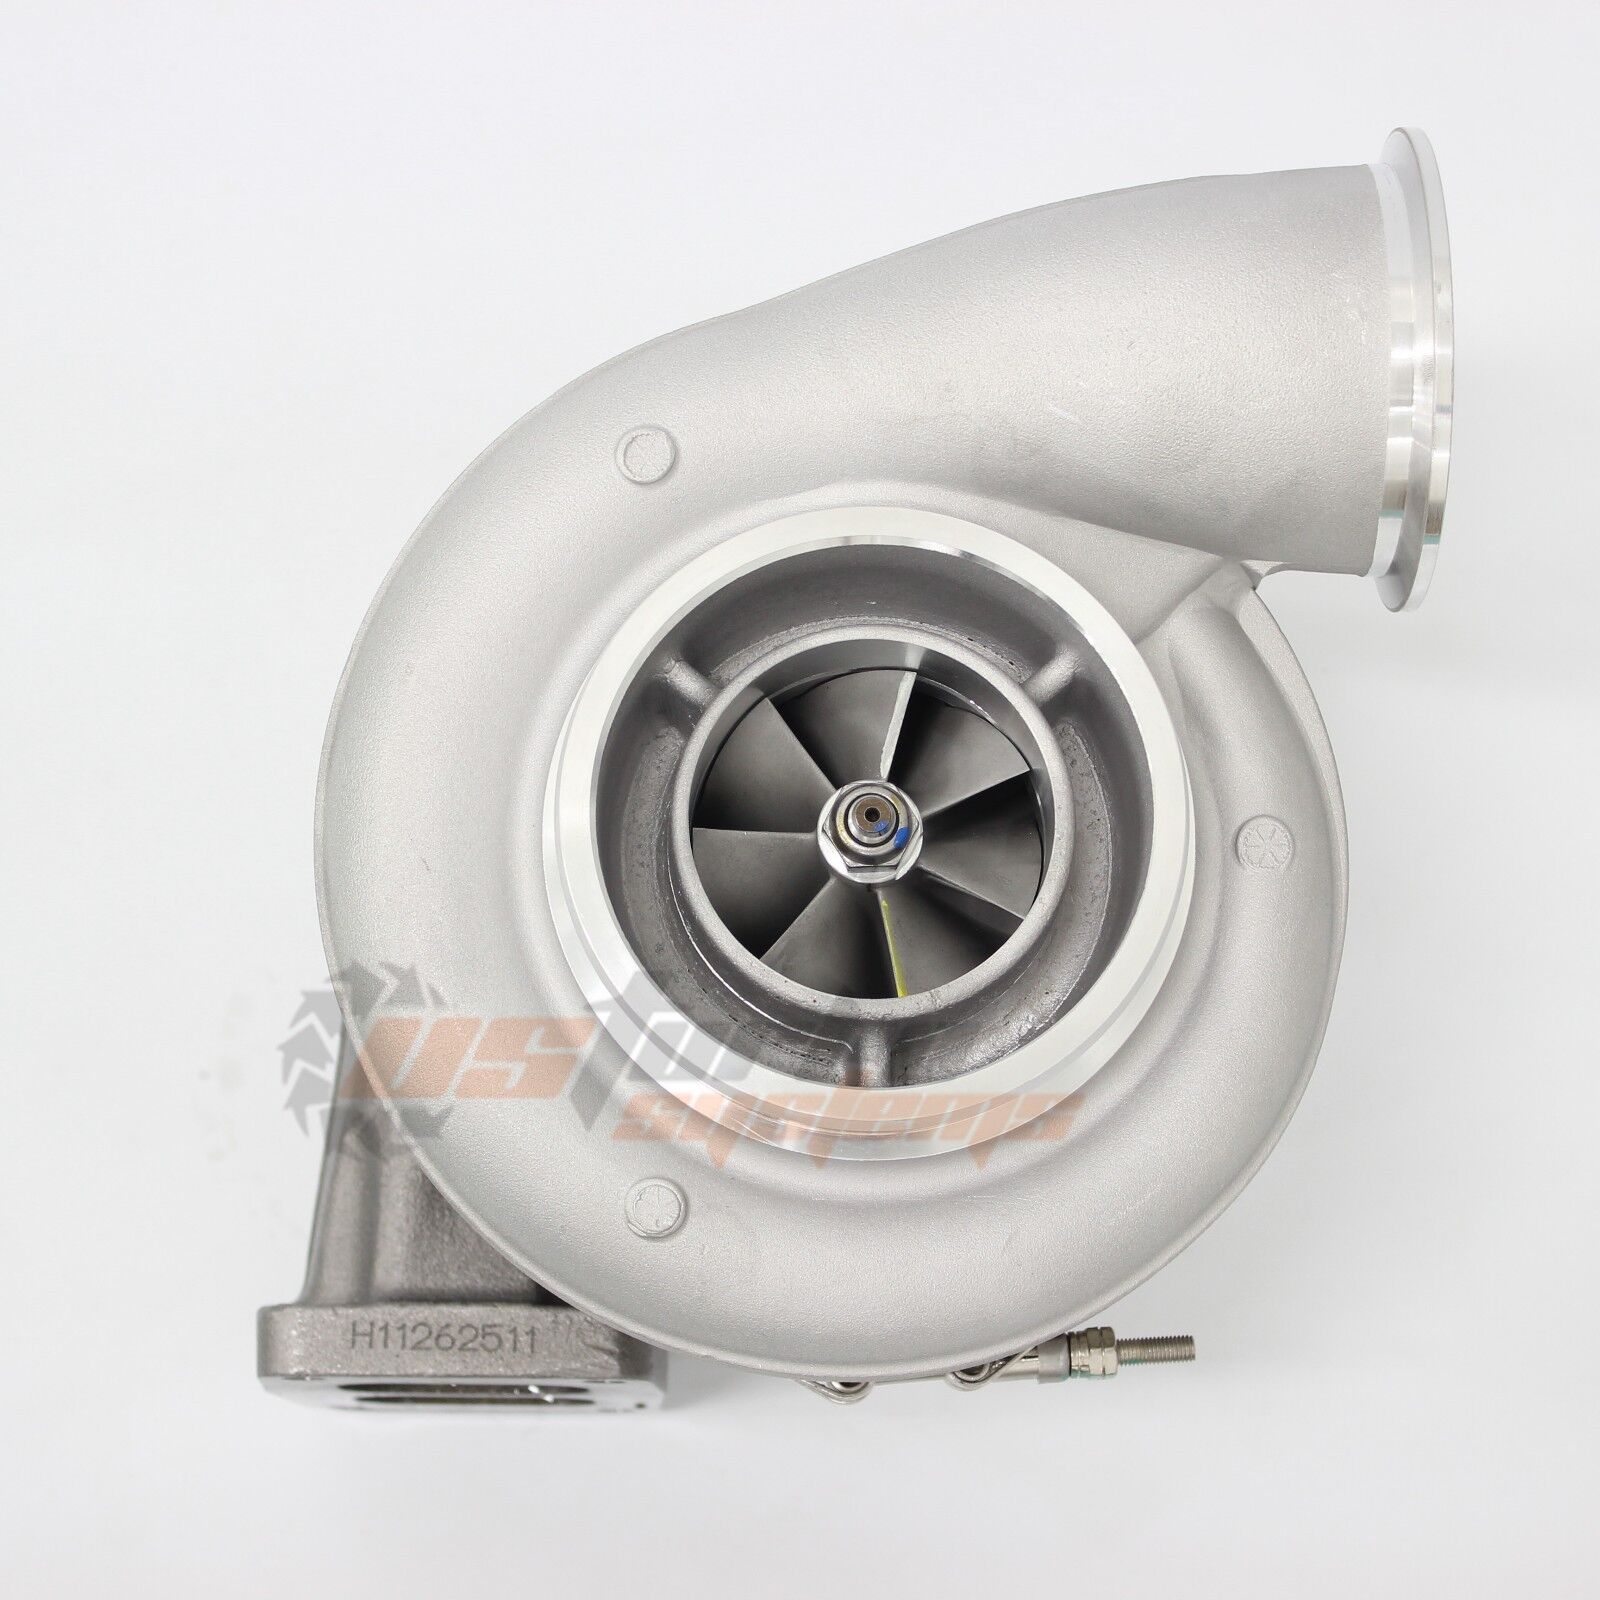 Aftermarket Brand New S400SX4-75 S475 Turbo T4 Twin Scroll 1.1A/R Turbo Charger